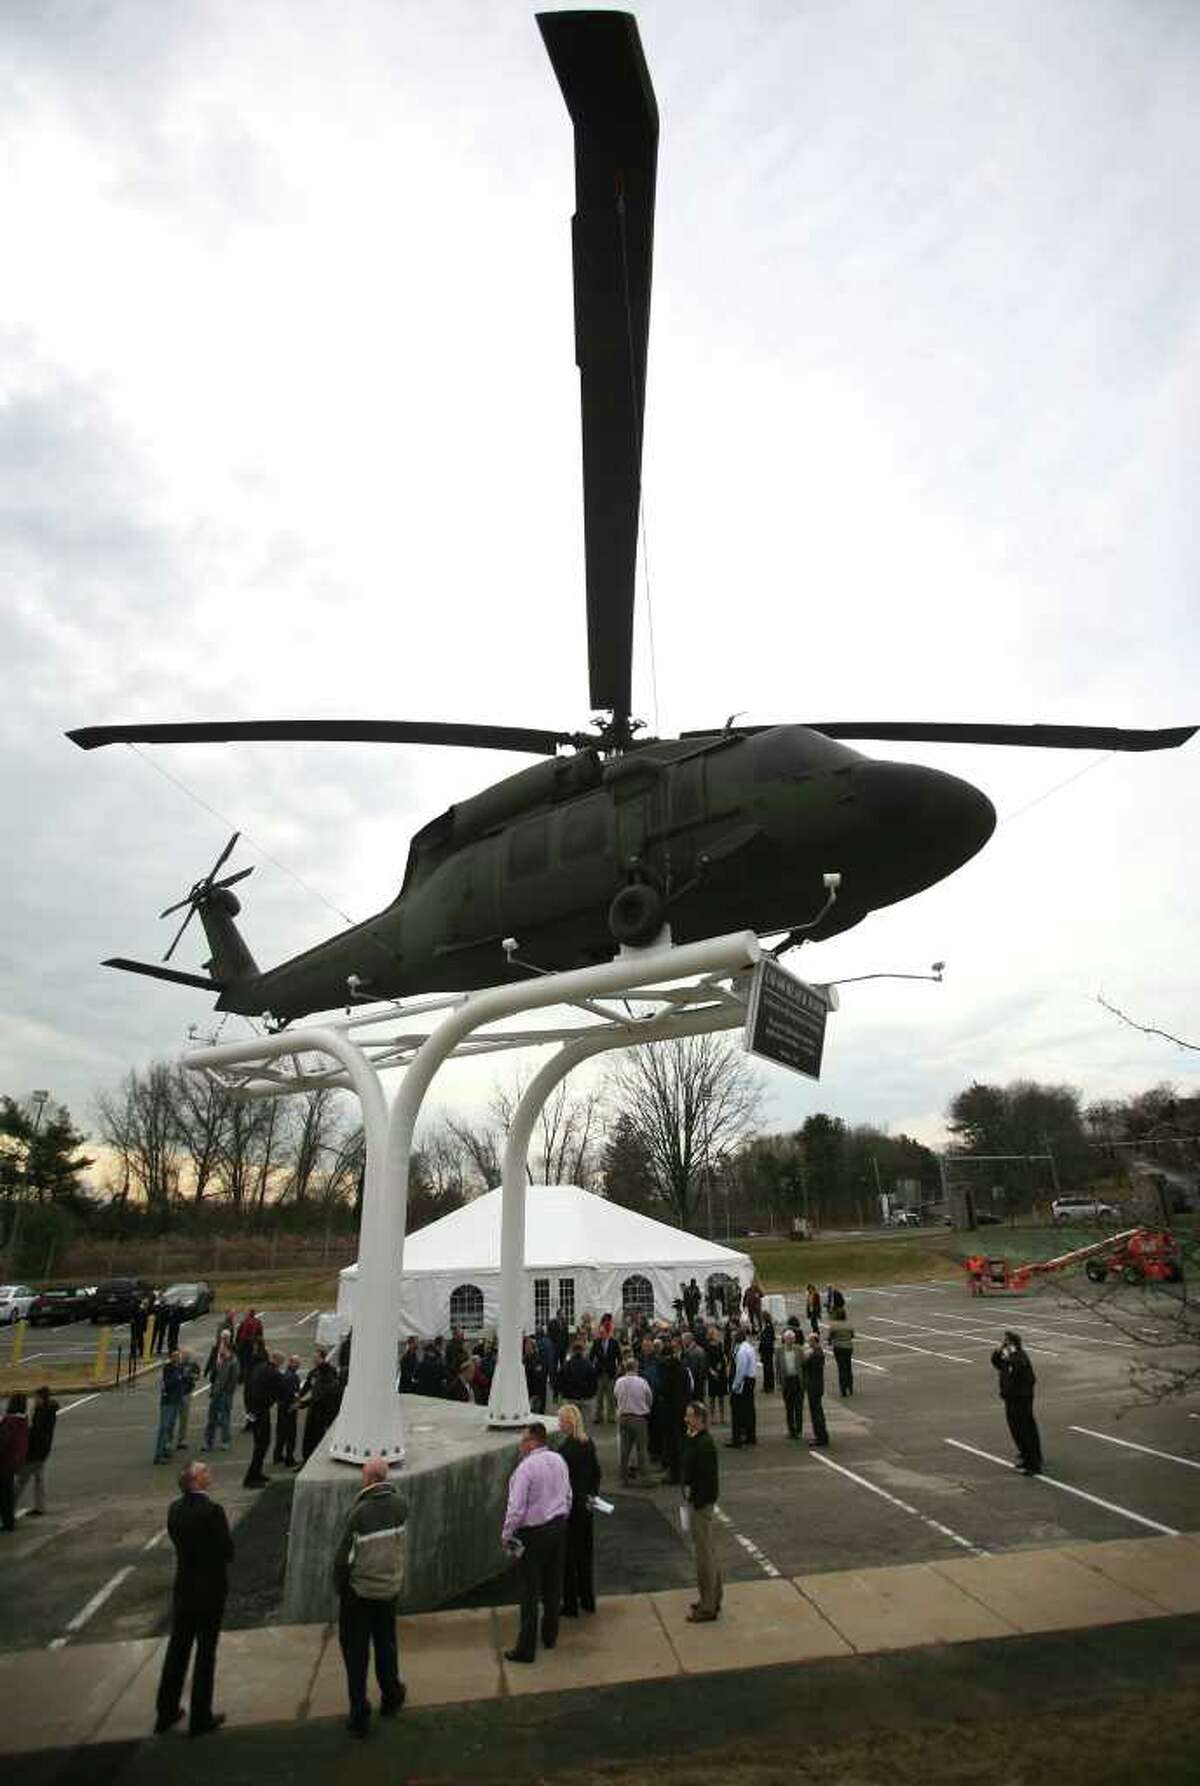 Sikorsky employees gather around the UH-60 Black Hawk helicopter unveiled in front of the company headquarters and factory on Main Street in Stratford on Wednesday, February 1, 2012.